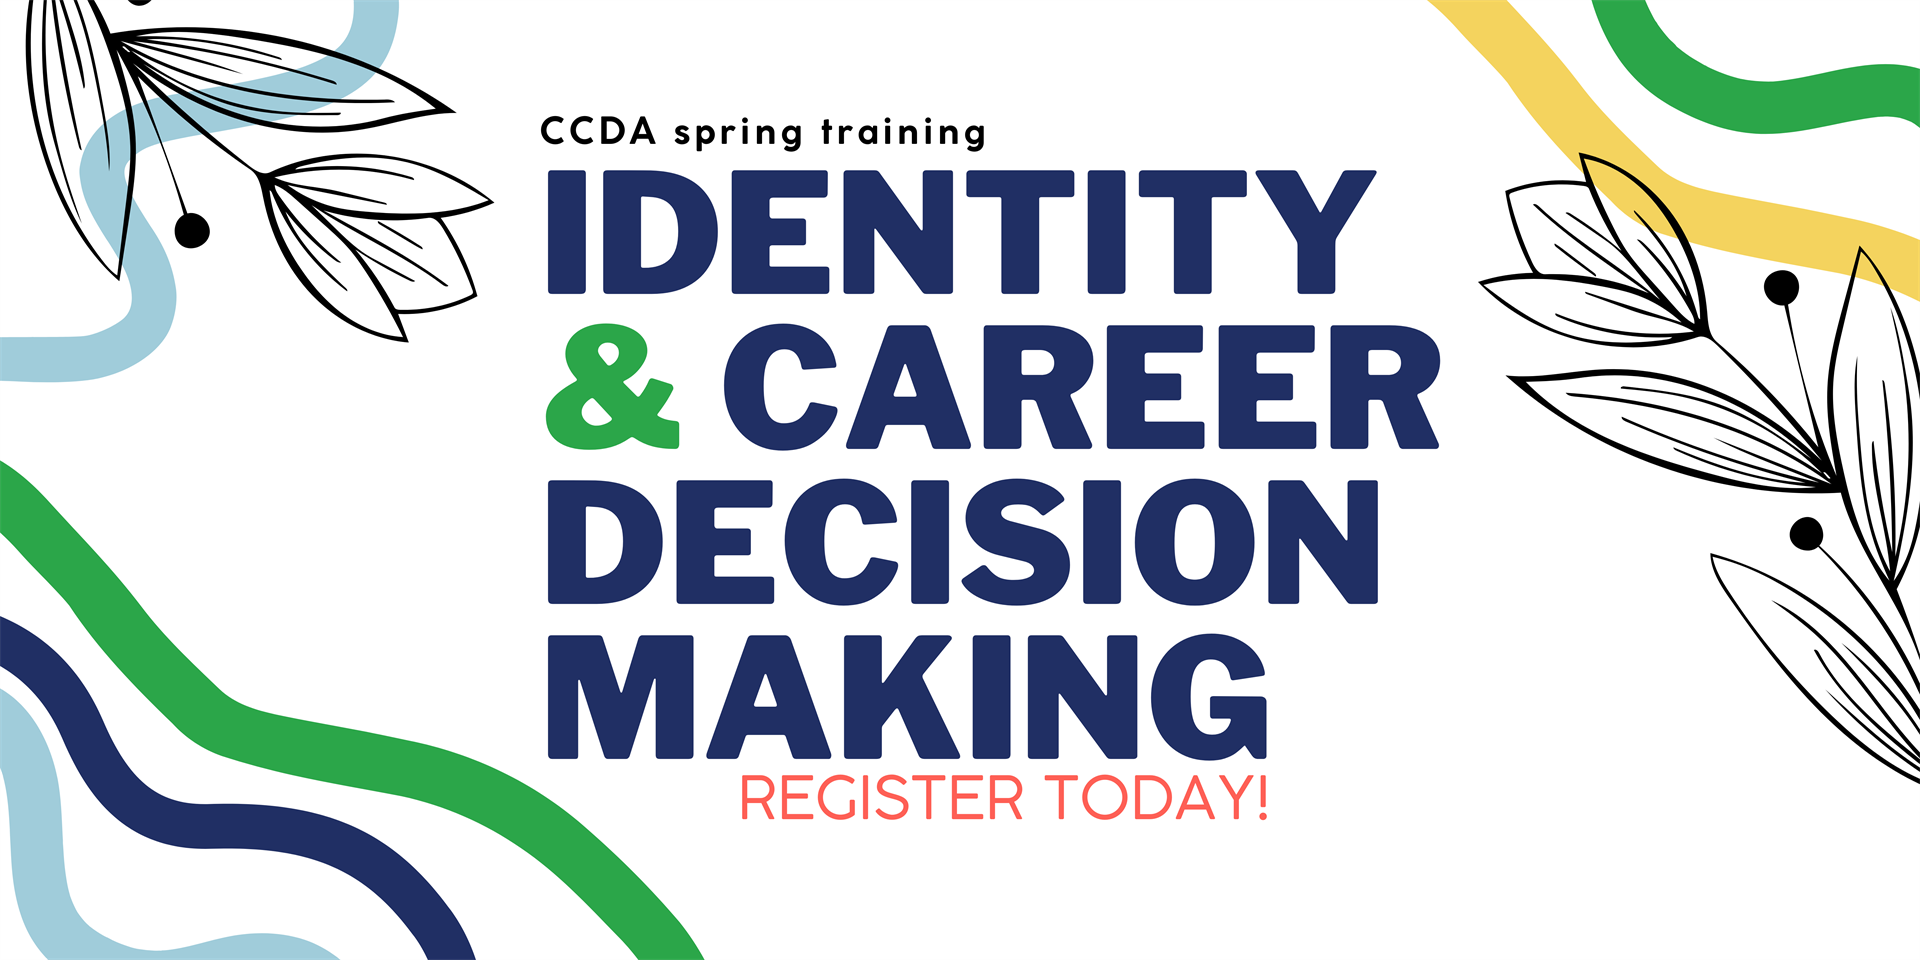 CCDA Spring Training: Identity & Career Decision Making. Register today!